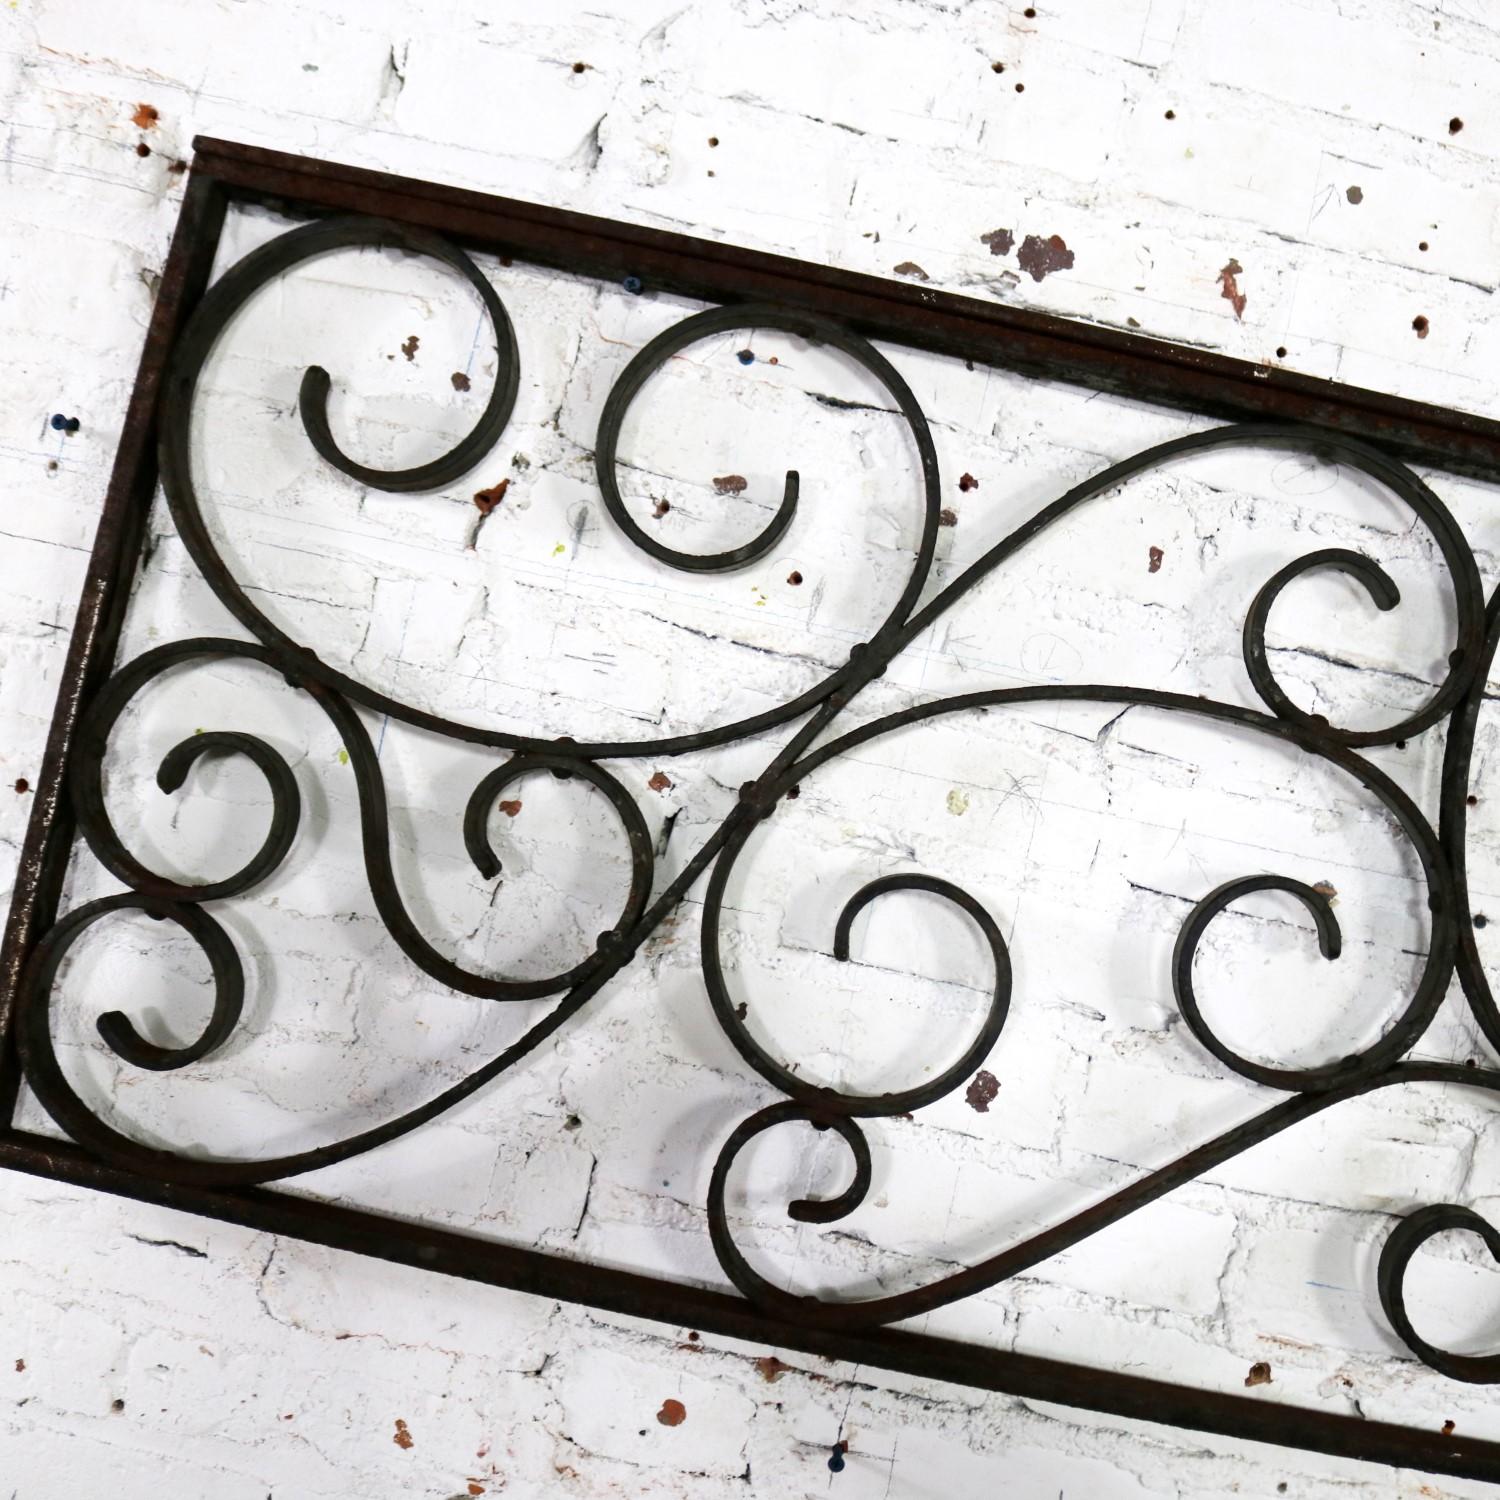 Antique Swirled Design Wrought Iron Railing Piece Trellis or Fence Section For Sale 7